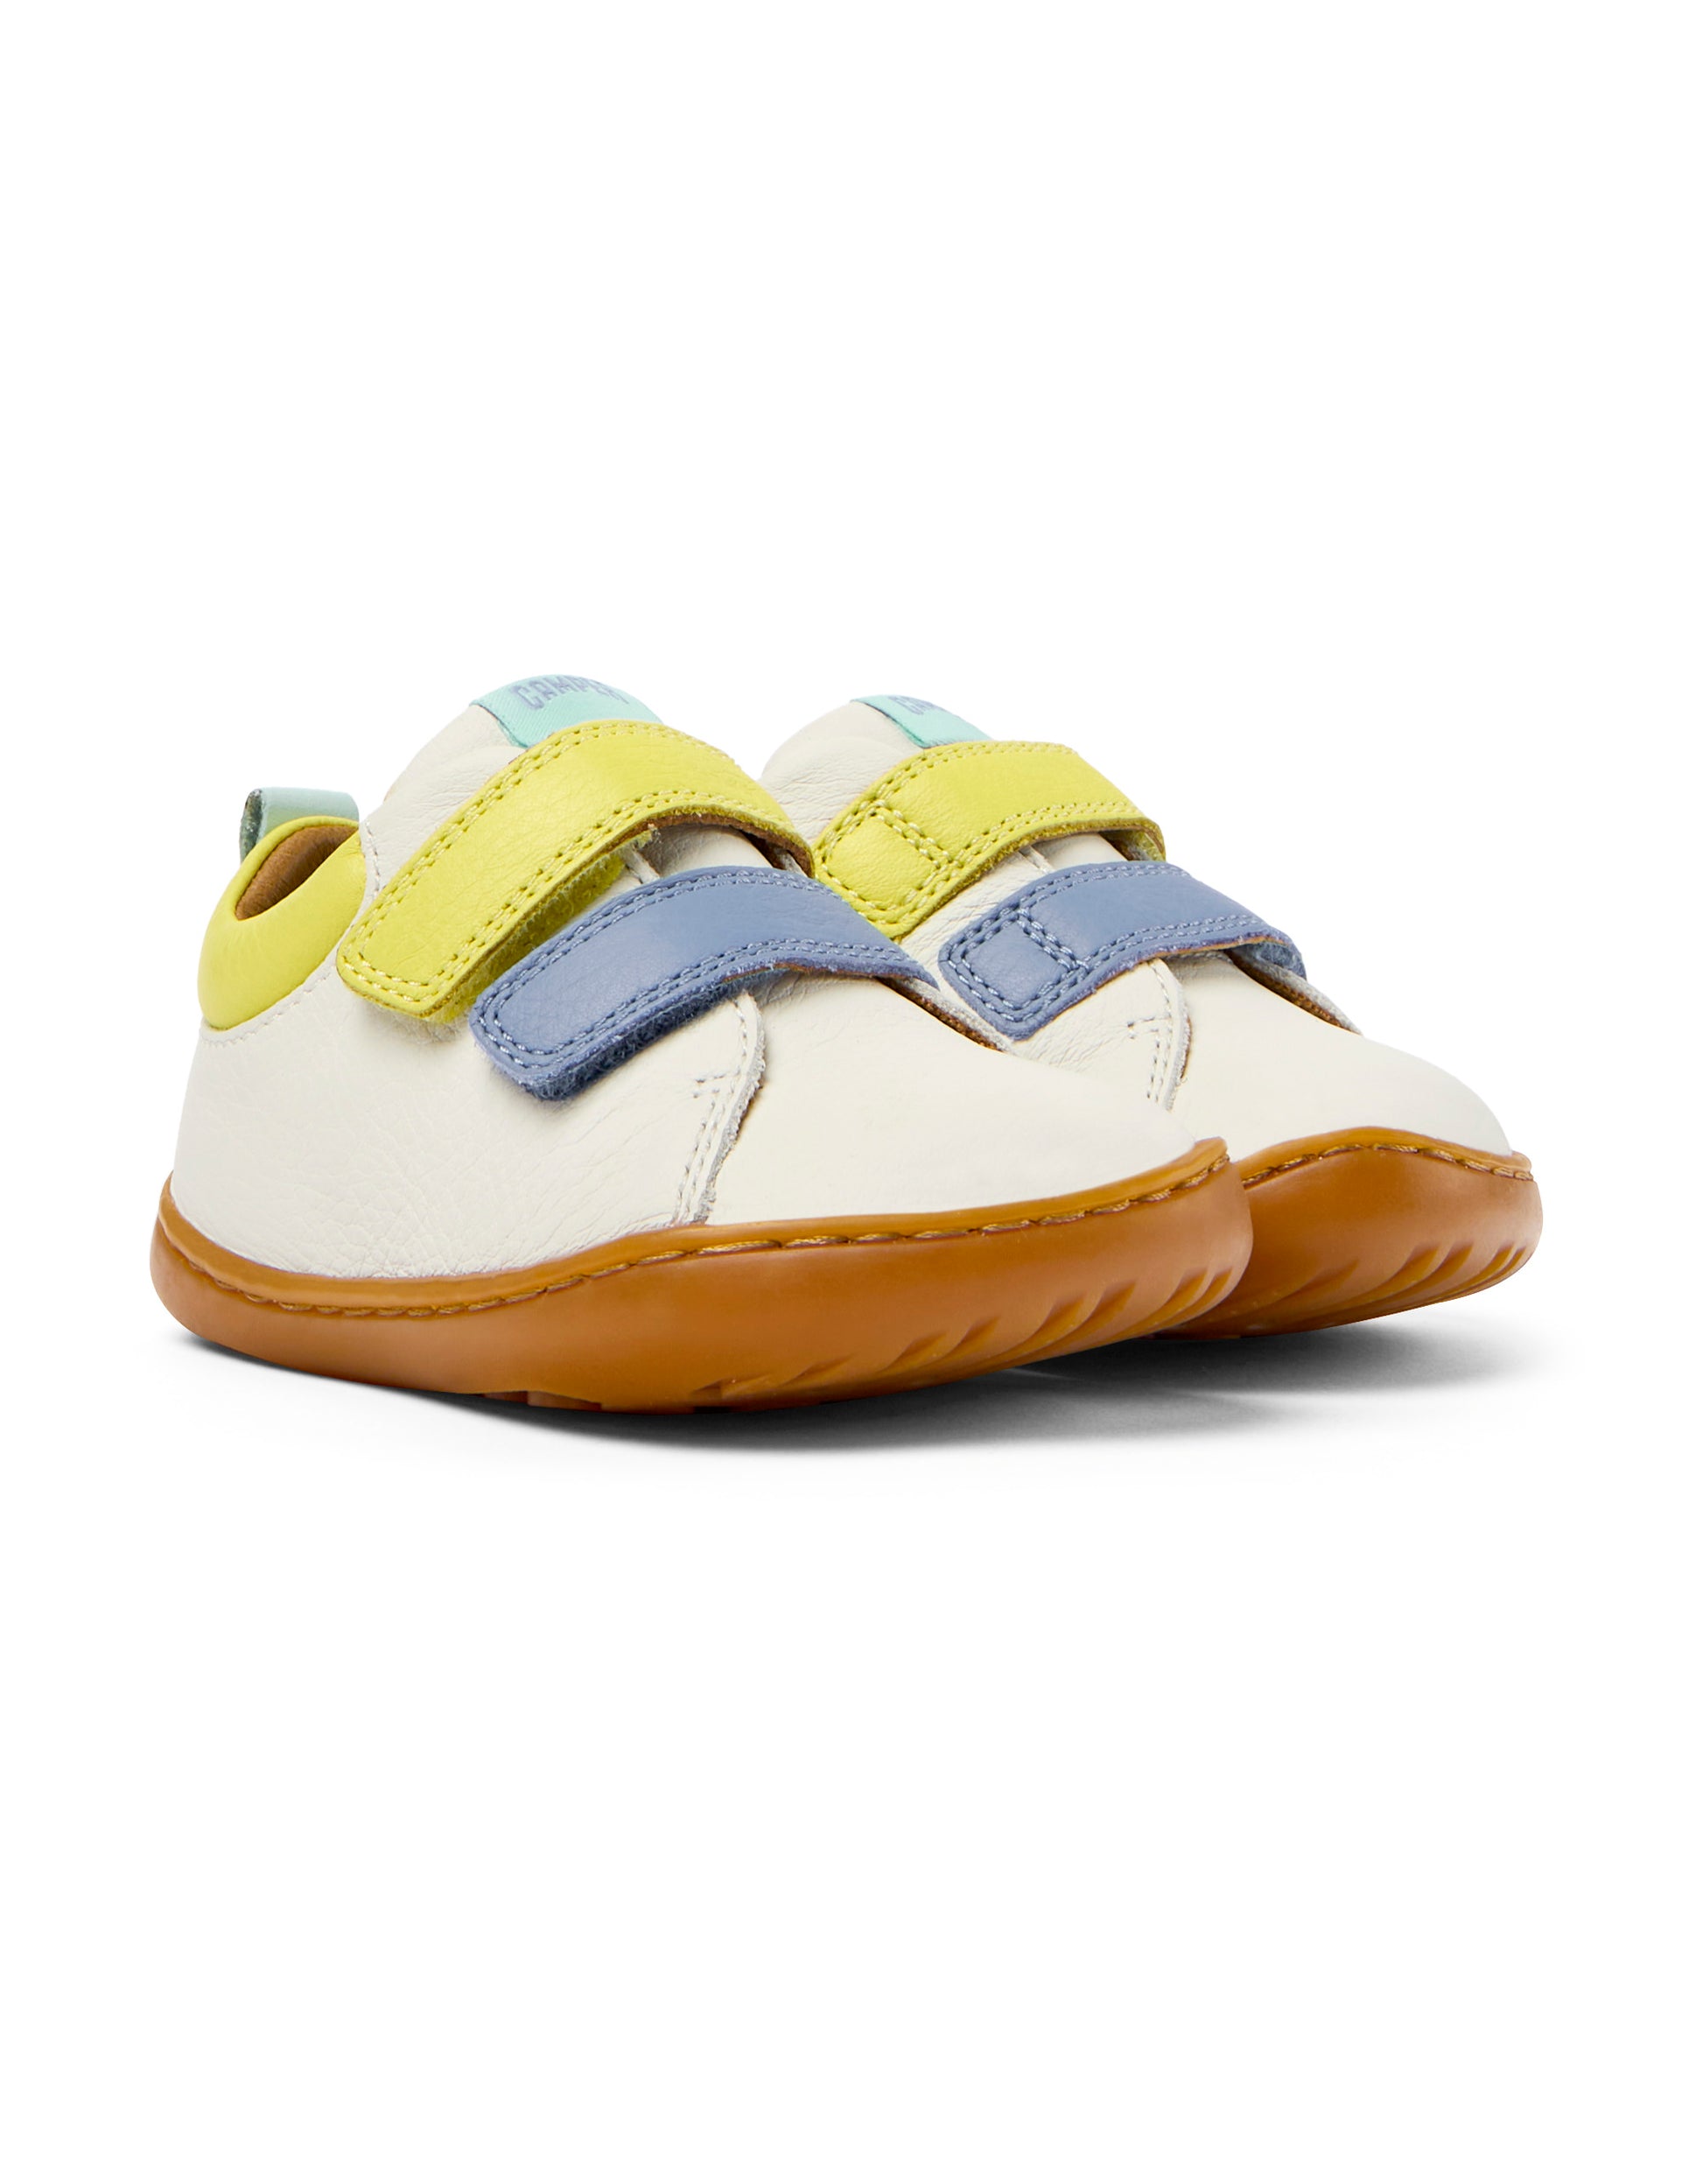 A unisex shoe by Camper, style Peu, in white with blue and yellow velcro straps. Angled view of a pair.